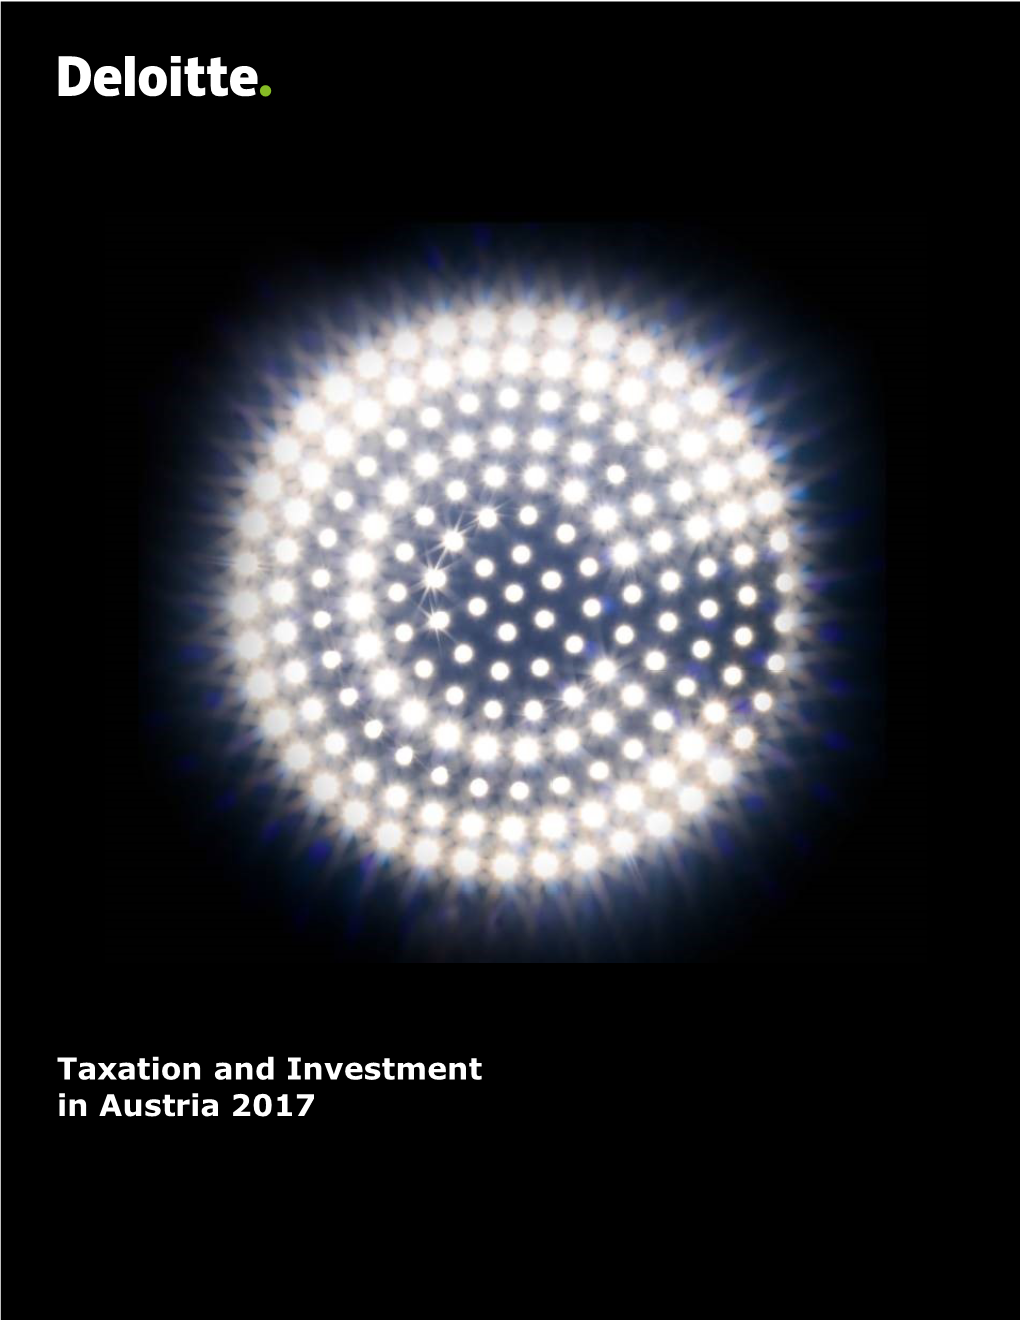 Taxation and Investment in Austria 2017